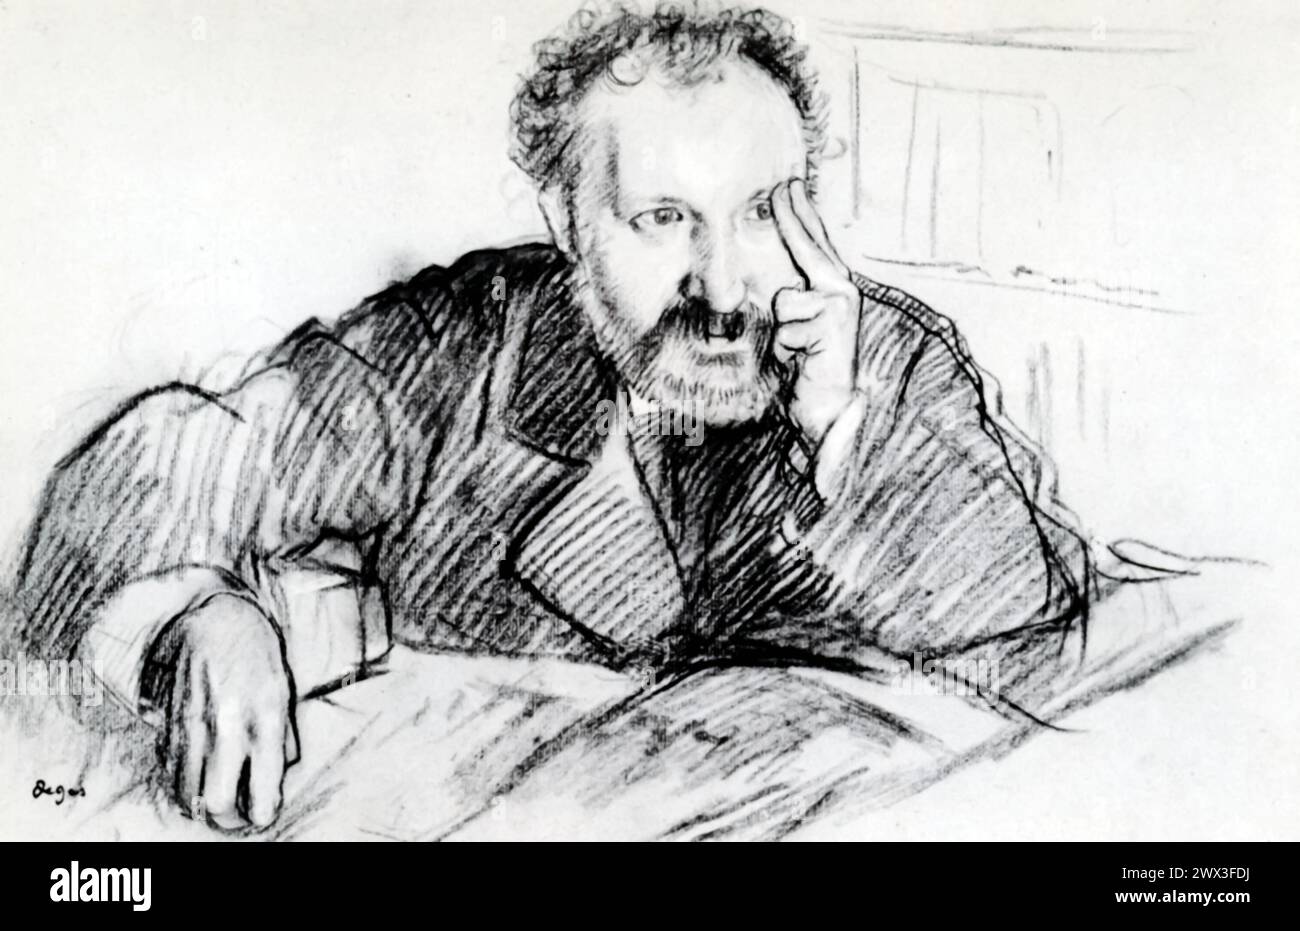 A study drawing of Émile Duranty using charcoal and white chalk by the artist Edgar Degas, dated between 1834 and 1917. Émile Duranty was a French novelist and critic, known for his association with the Realist and Naturalist movements in literature, which paralleled Degas's own interest in depicting modern life and its characters. Stock Photo